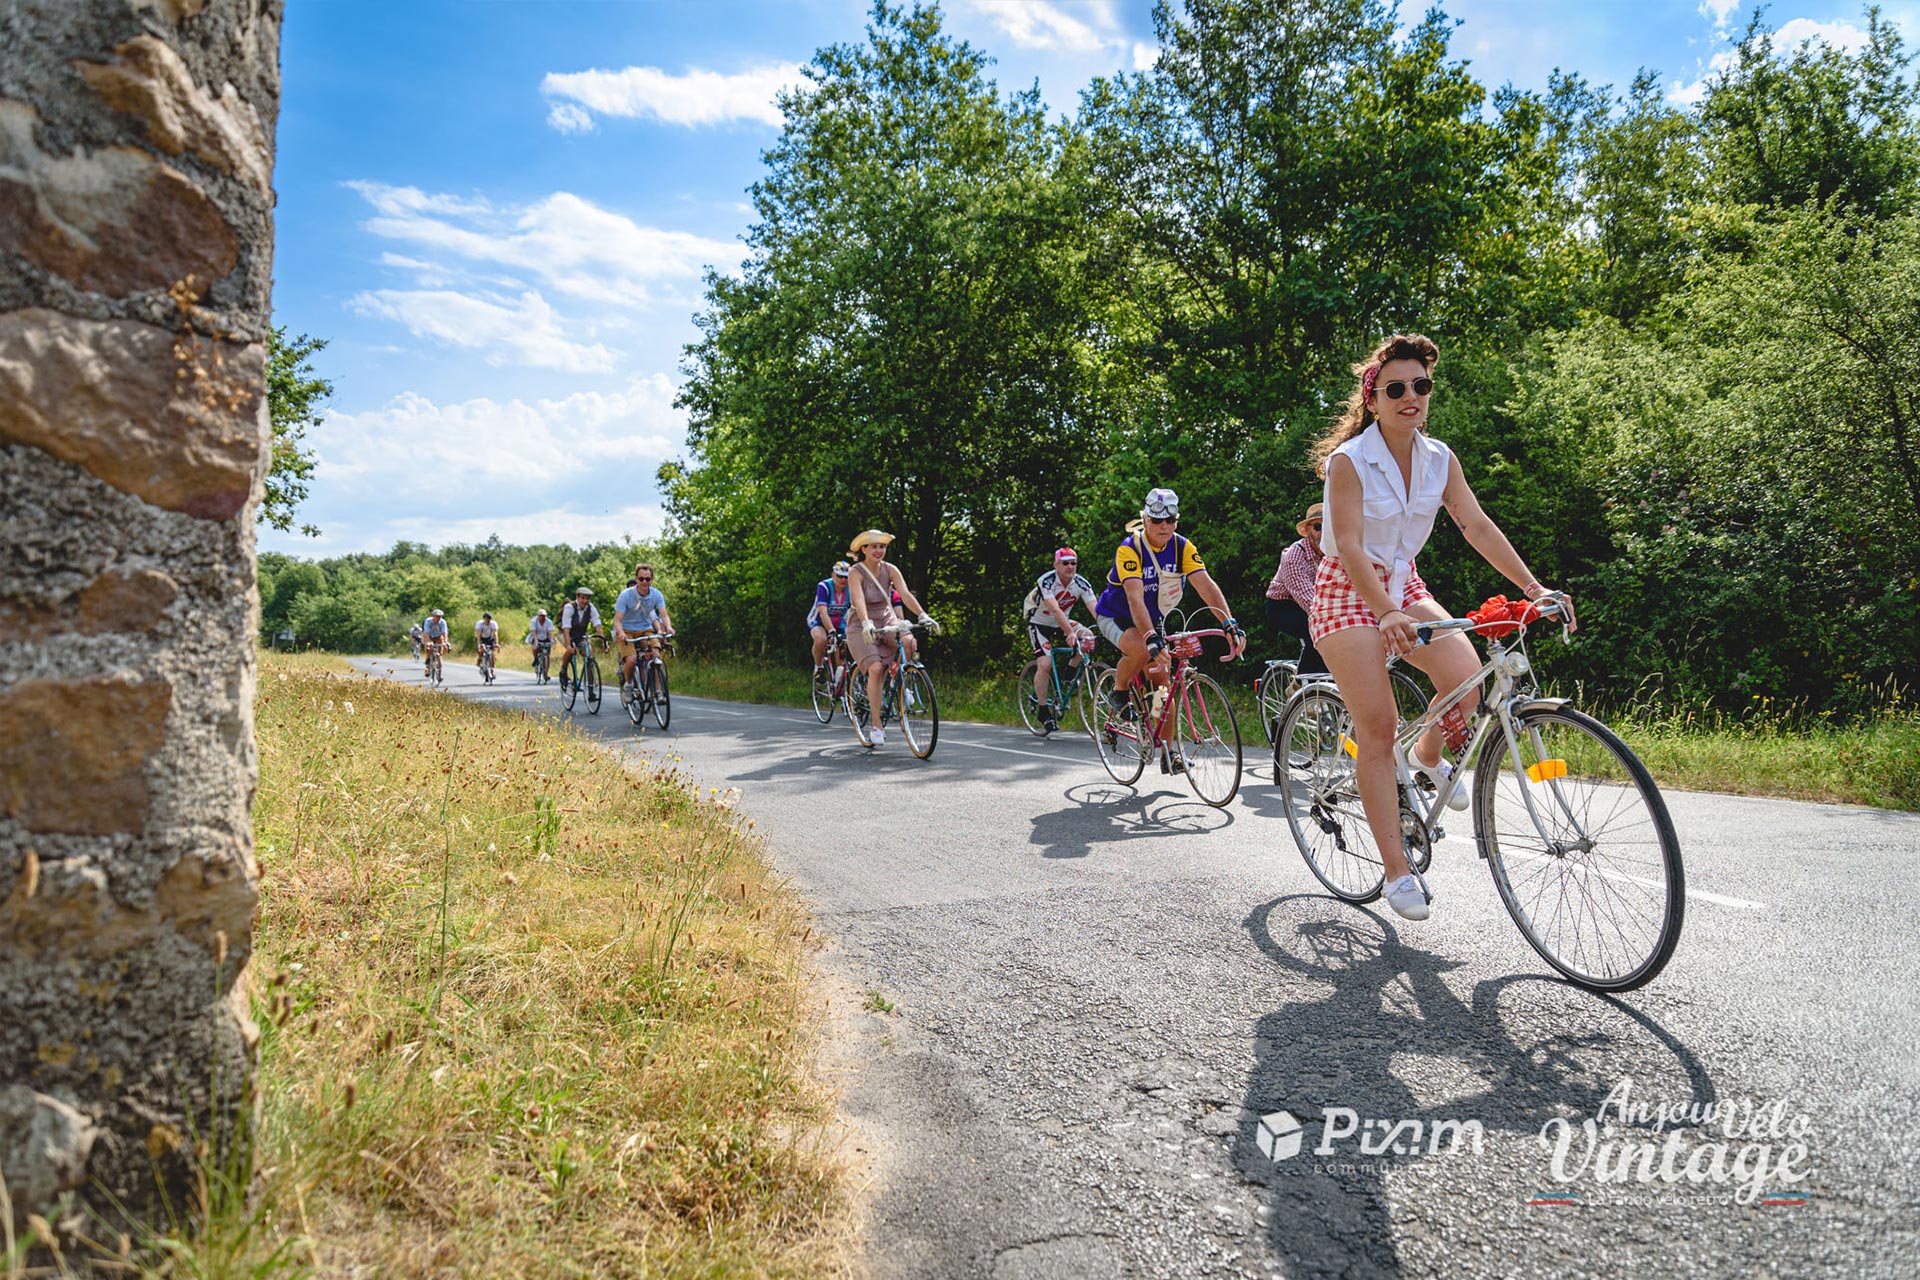 La Rando Vélo Rétro at Saumur, France - From 30th june to 2nd july